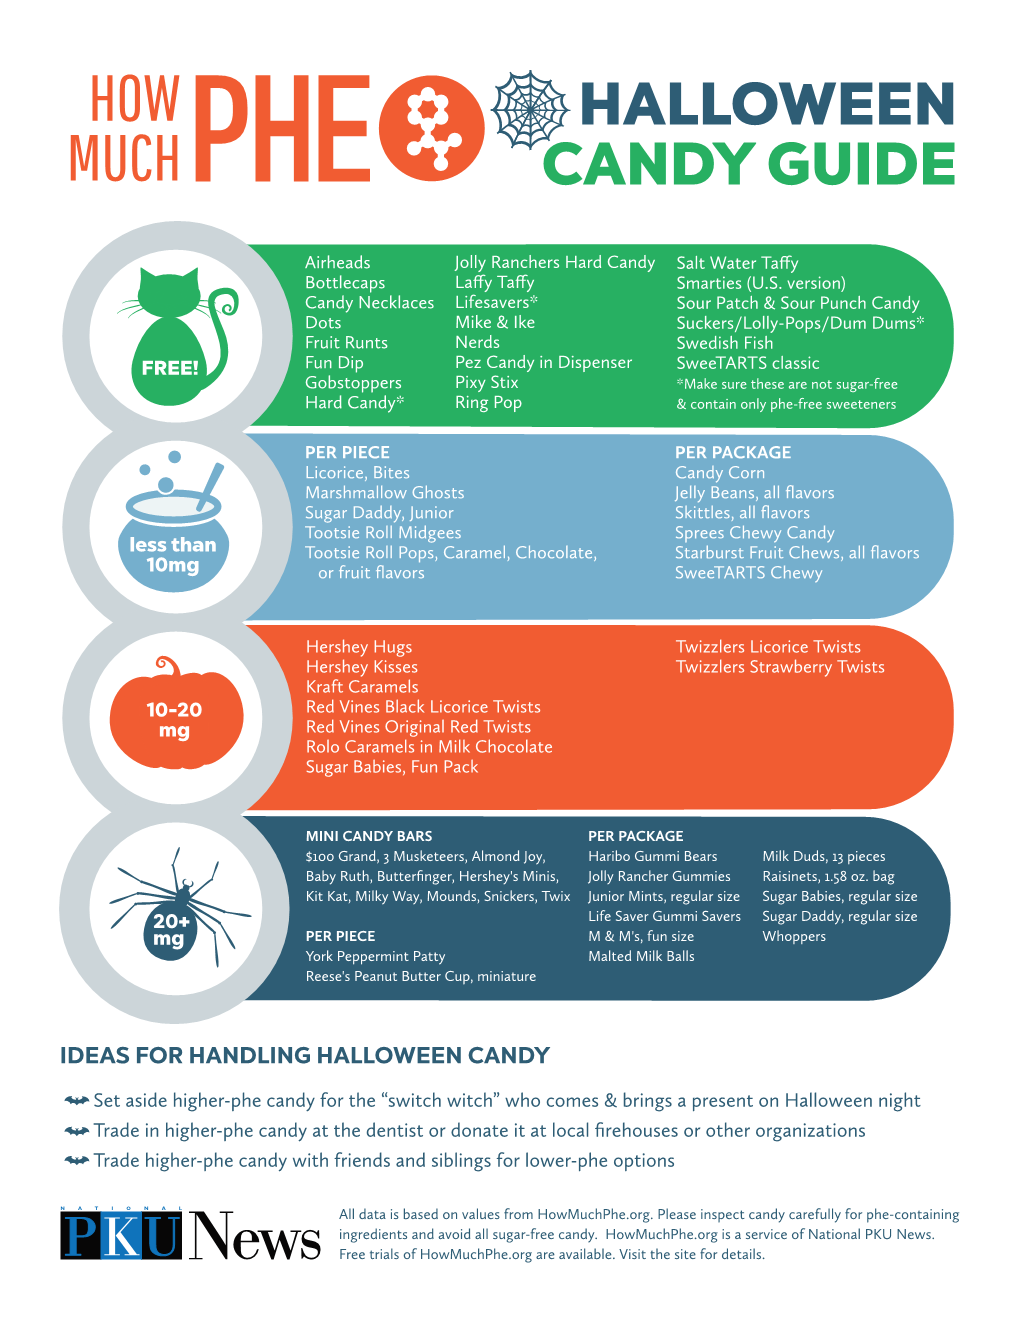 Halloween Candy Guide